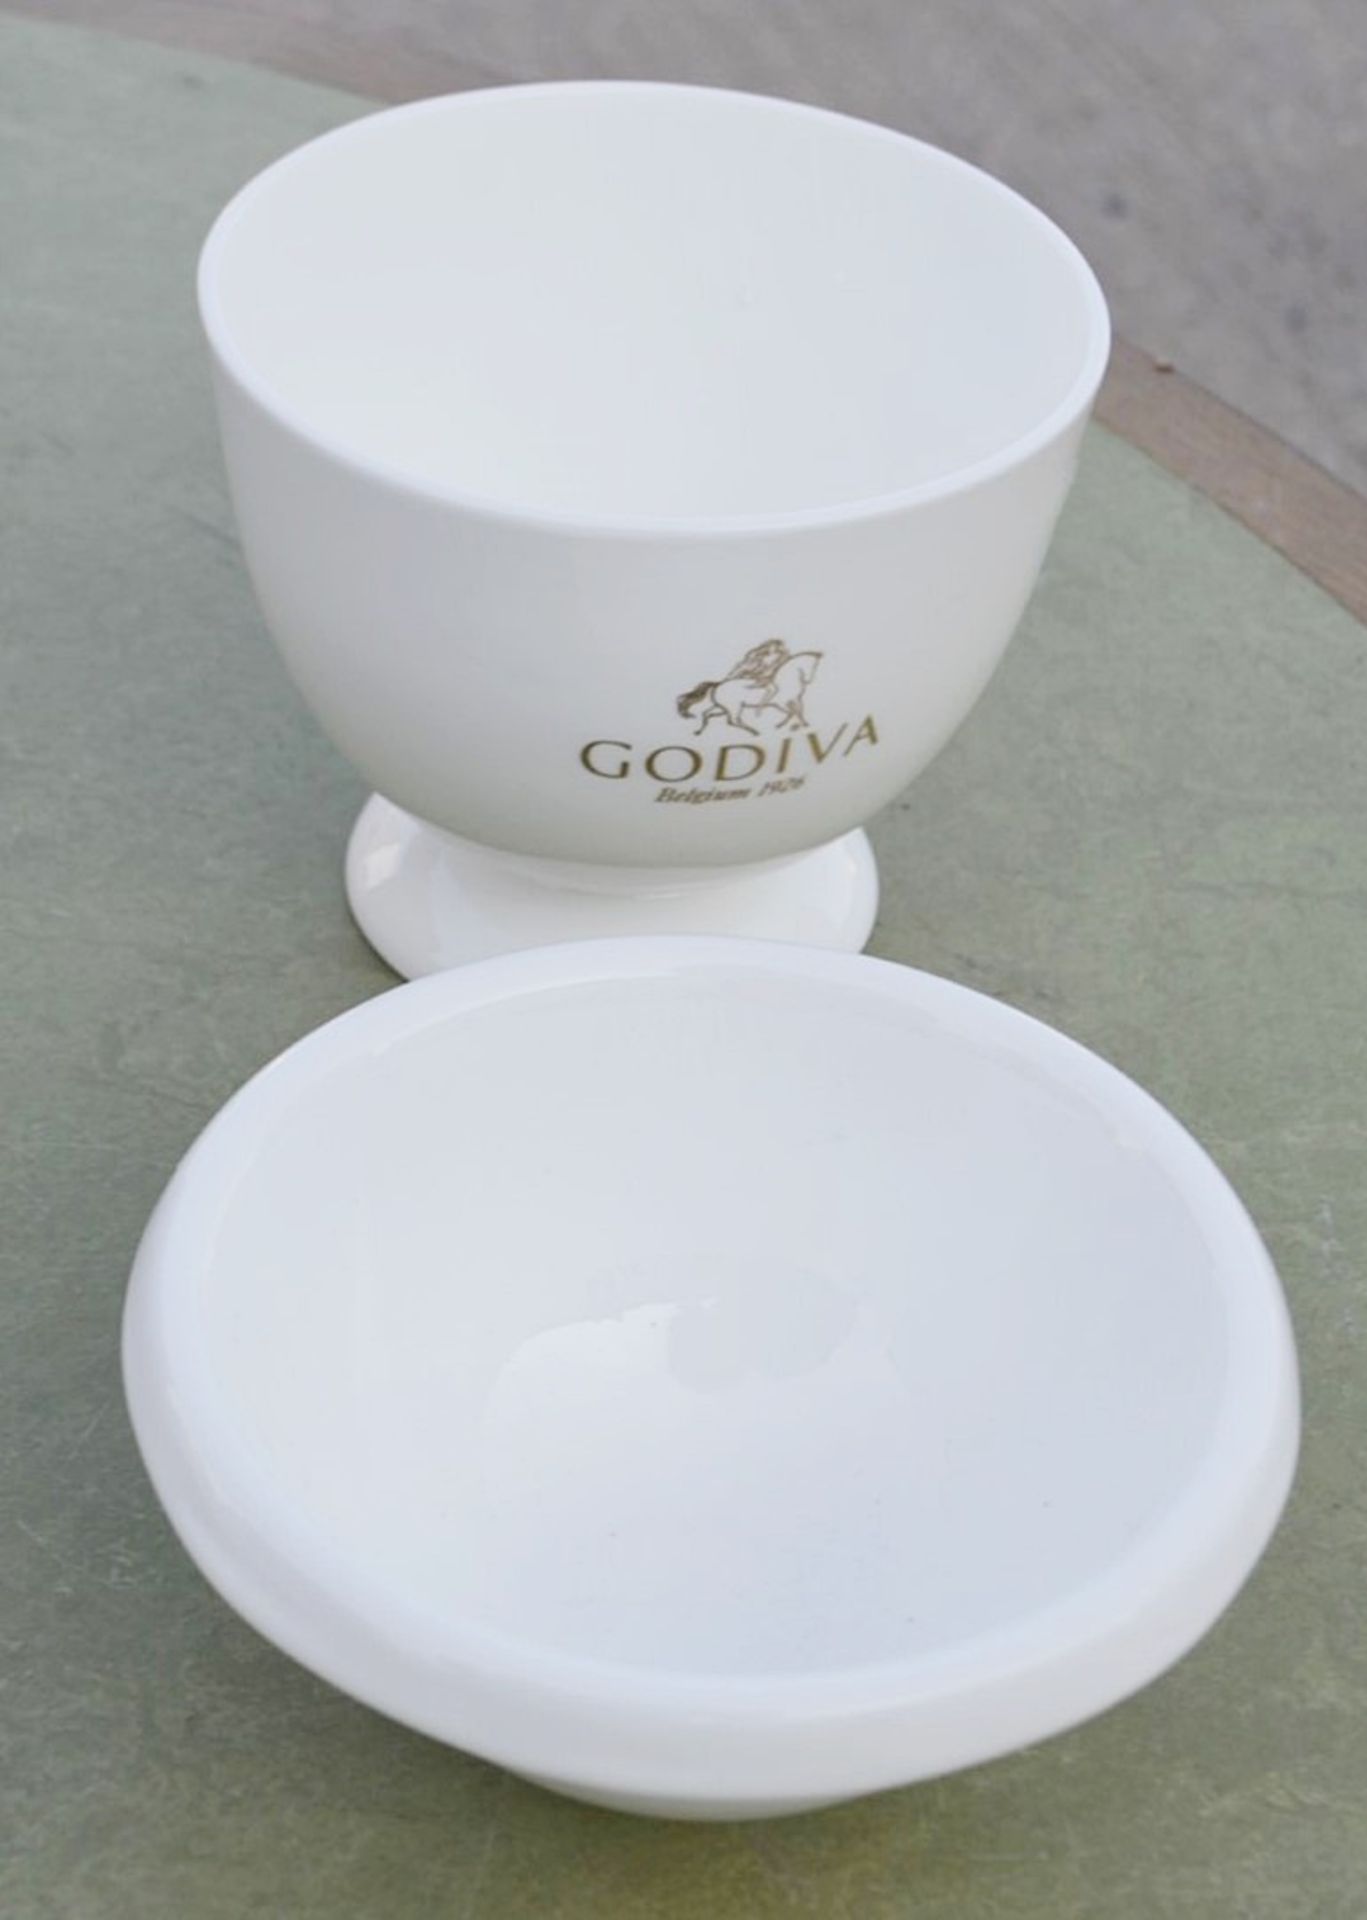 10 x GODIVA Branded Bone China Chocolate Fondu Sets - Recently Removed From An Iconic Tea Room - Image 4 of 5